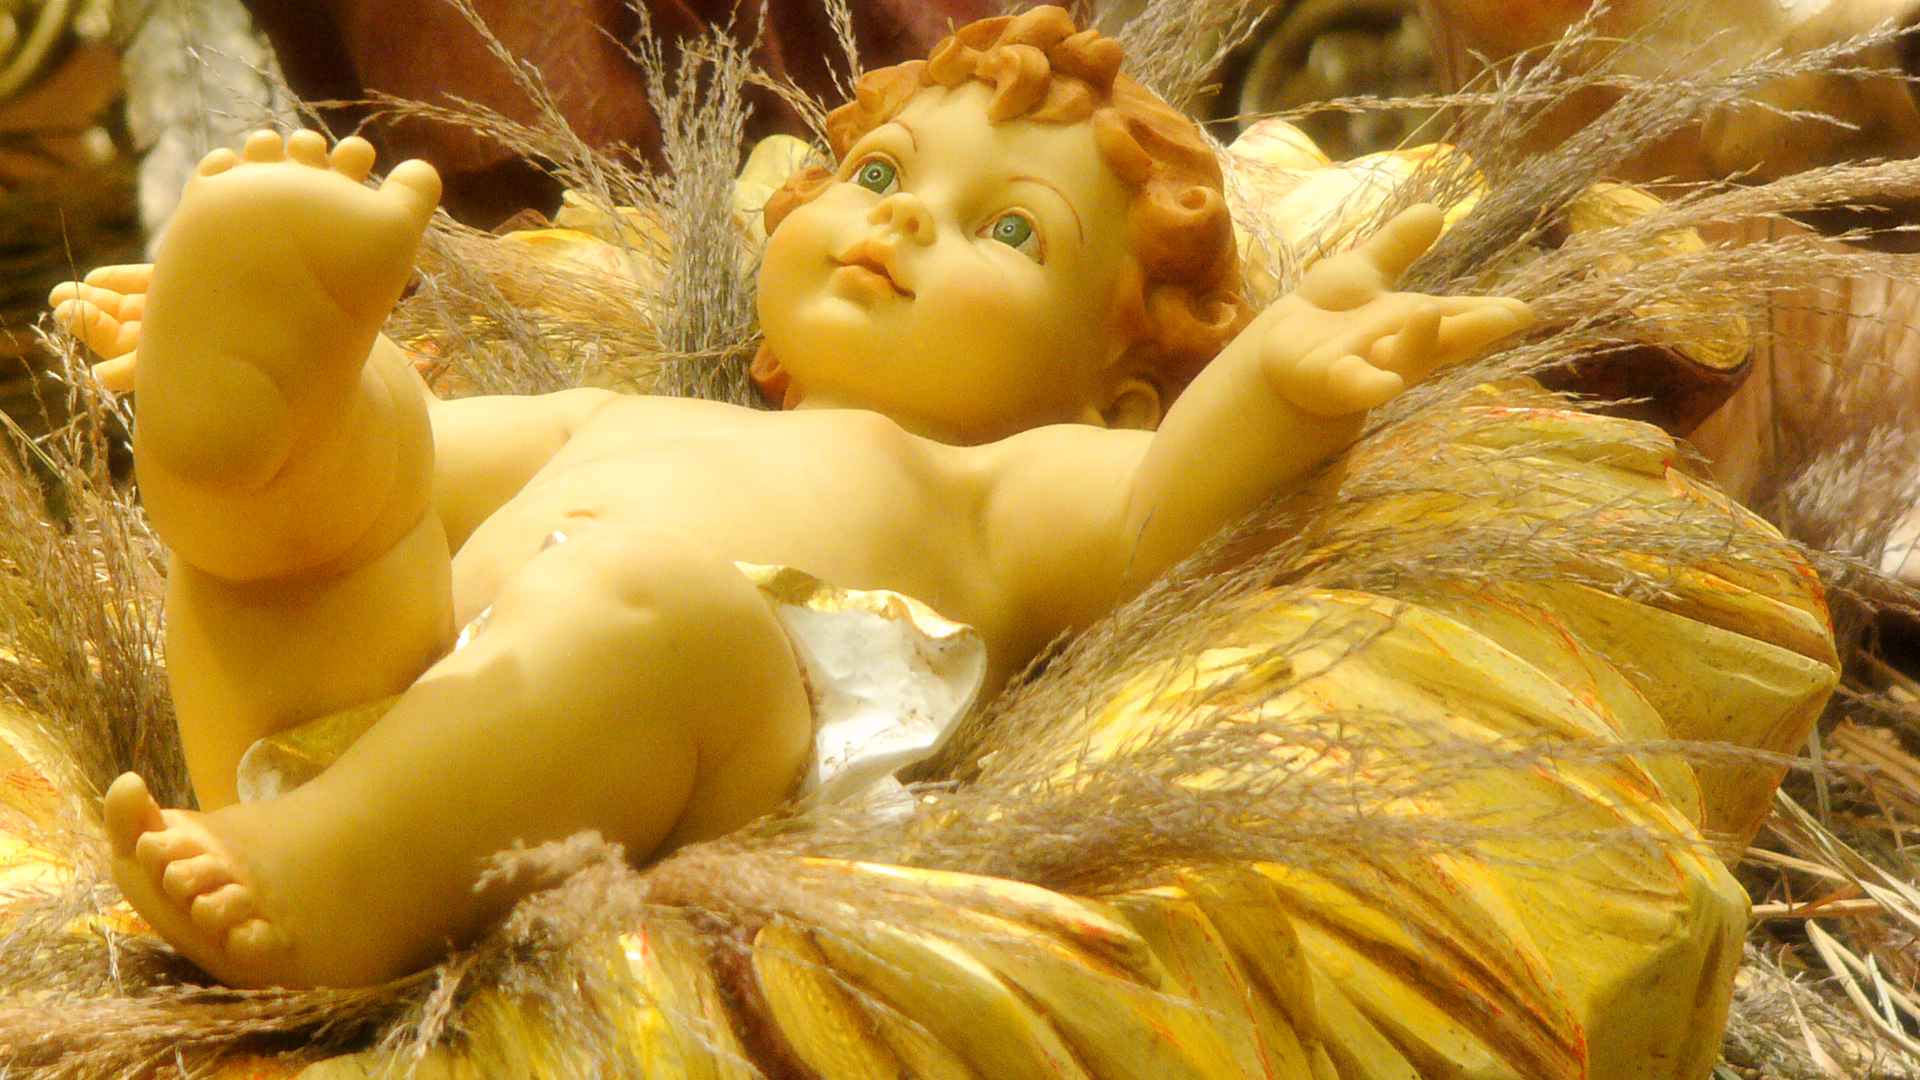 Photos Of Baby Jesus - HD Wallpapers Lovely